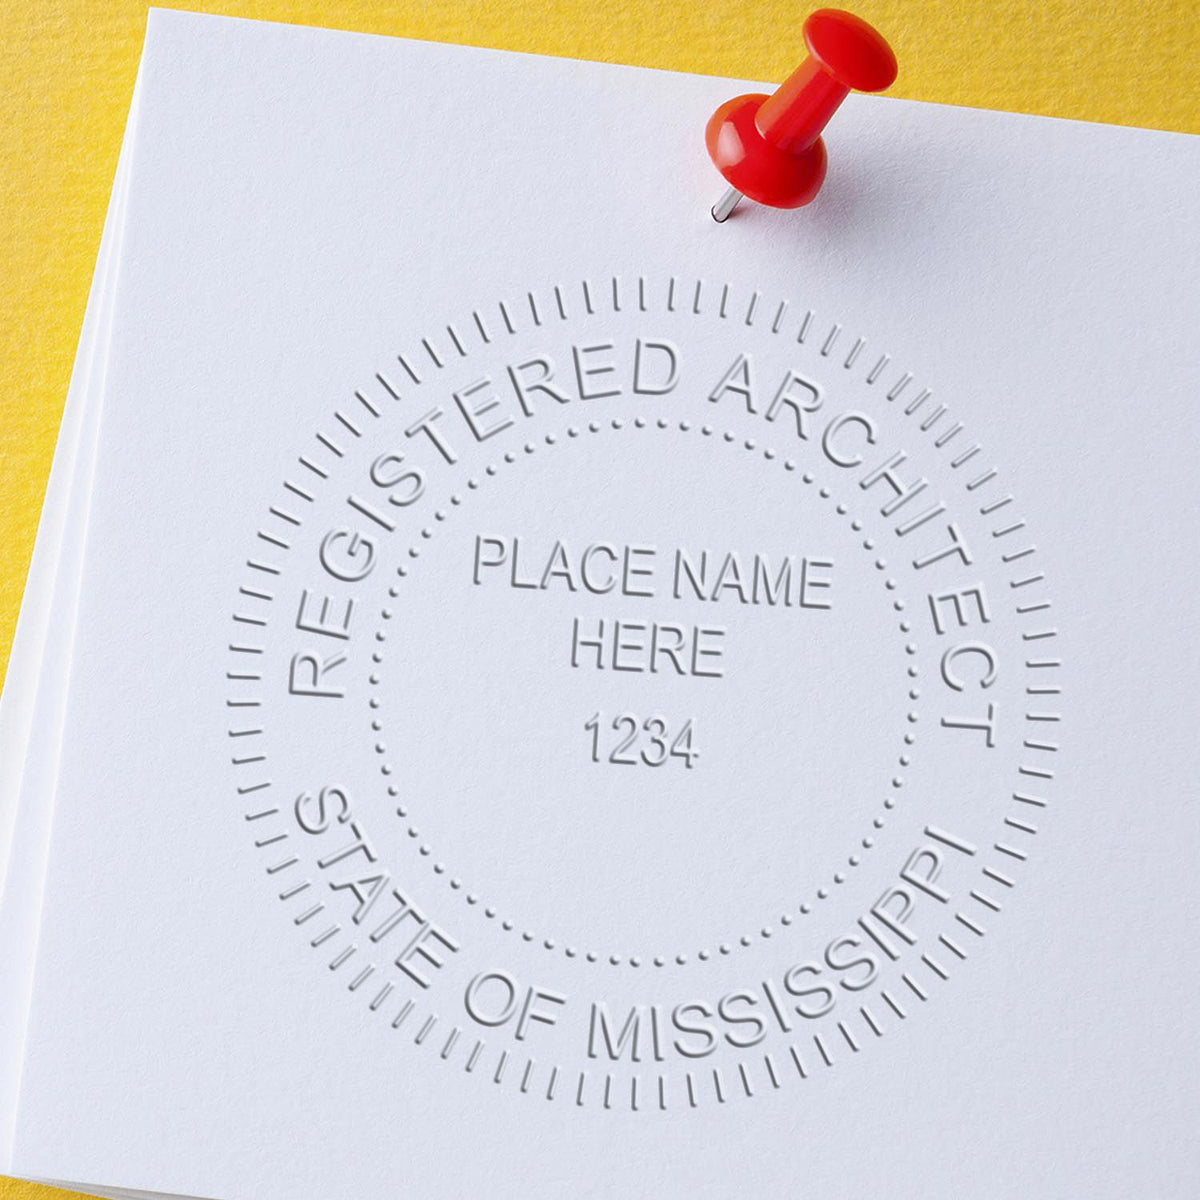 A lifestyle photo showing a stamped image of the Mississippi Desk Architect Embossing Seal on a piece of paper